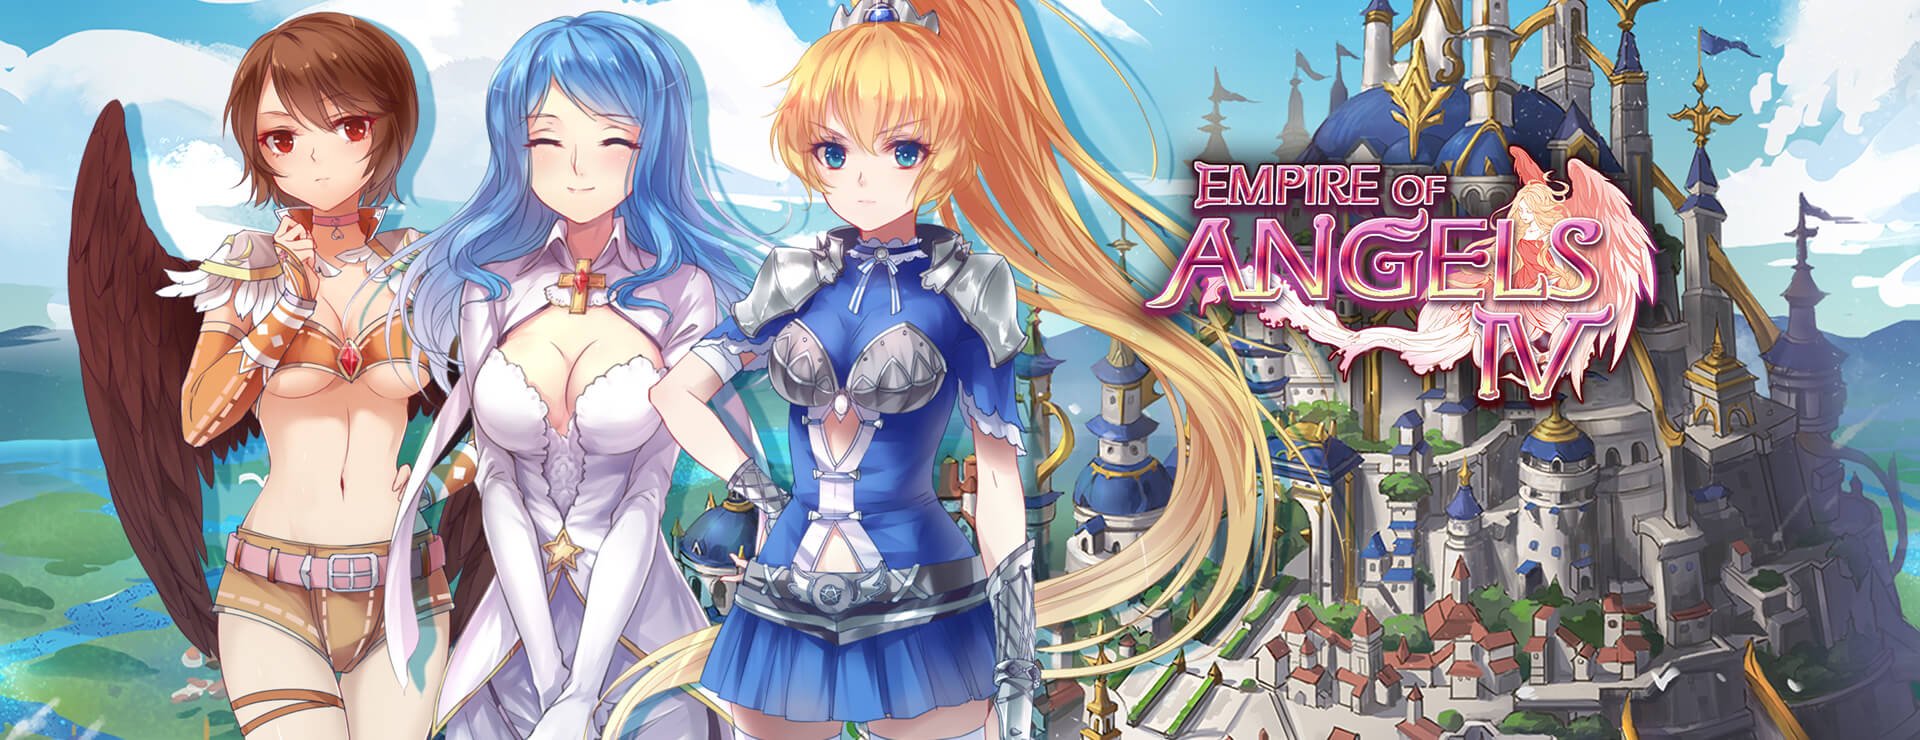 Empire of Angels IV - Action Aventure Jeu